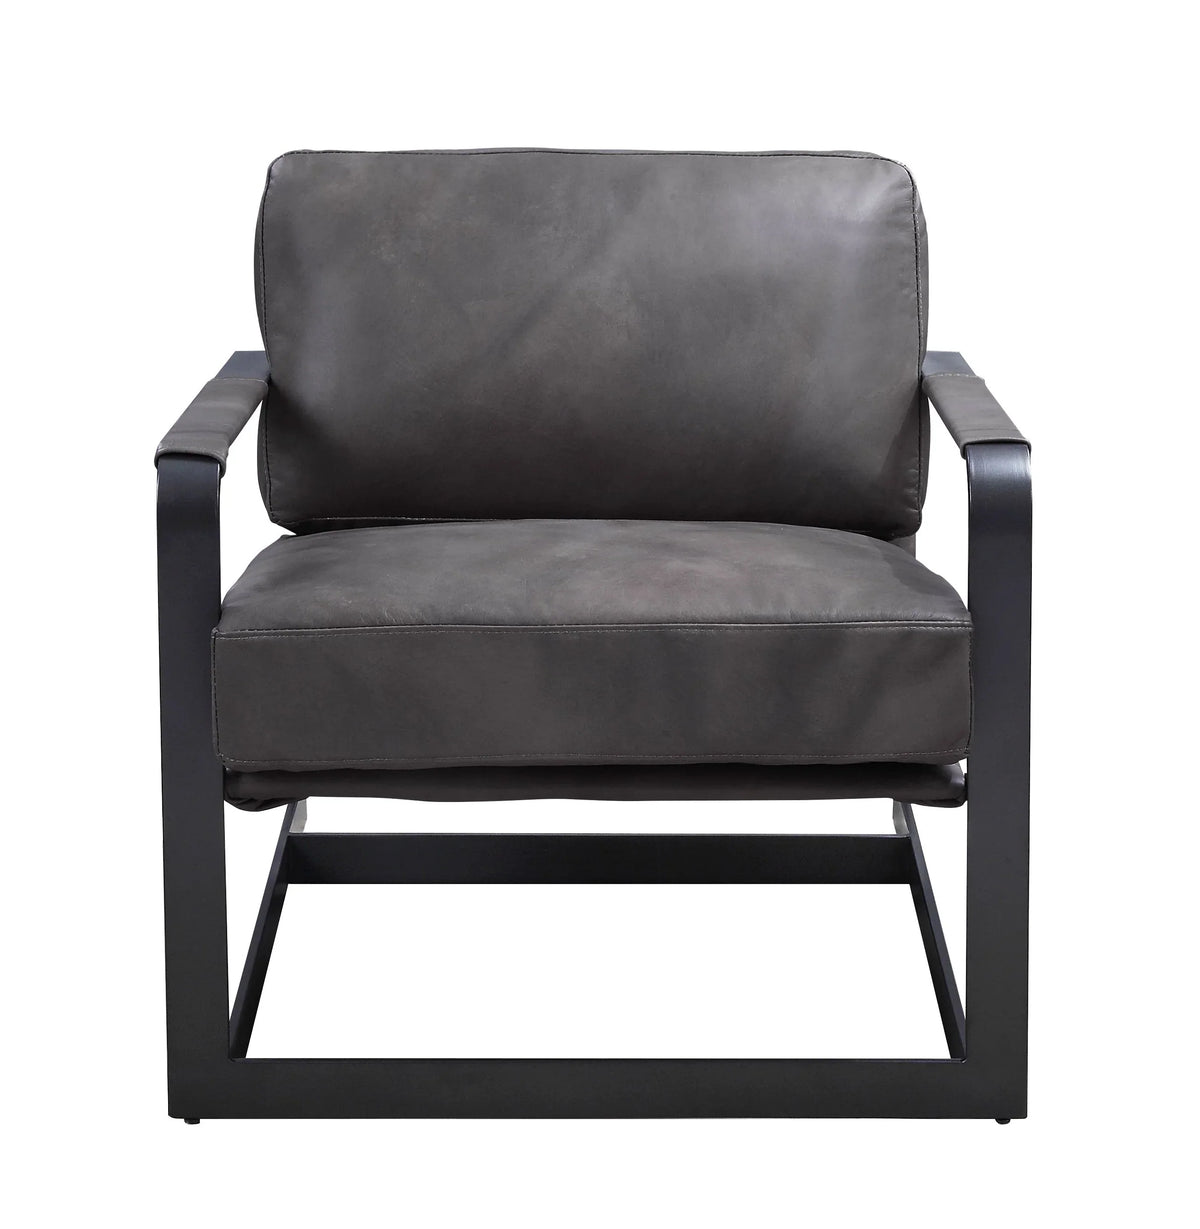 Locnos Gray Top Grain Leather & Black Finish Accent Chair Model 59944 By ACME Furniture